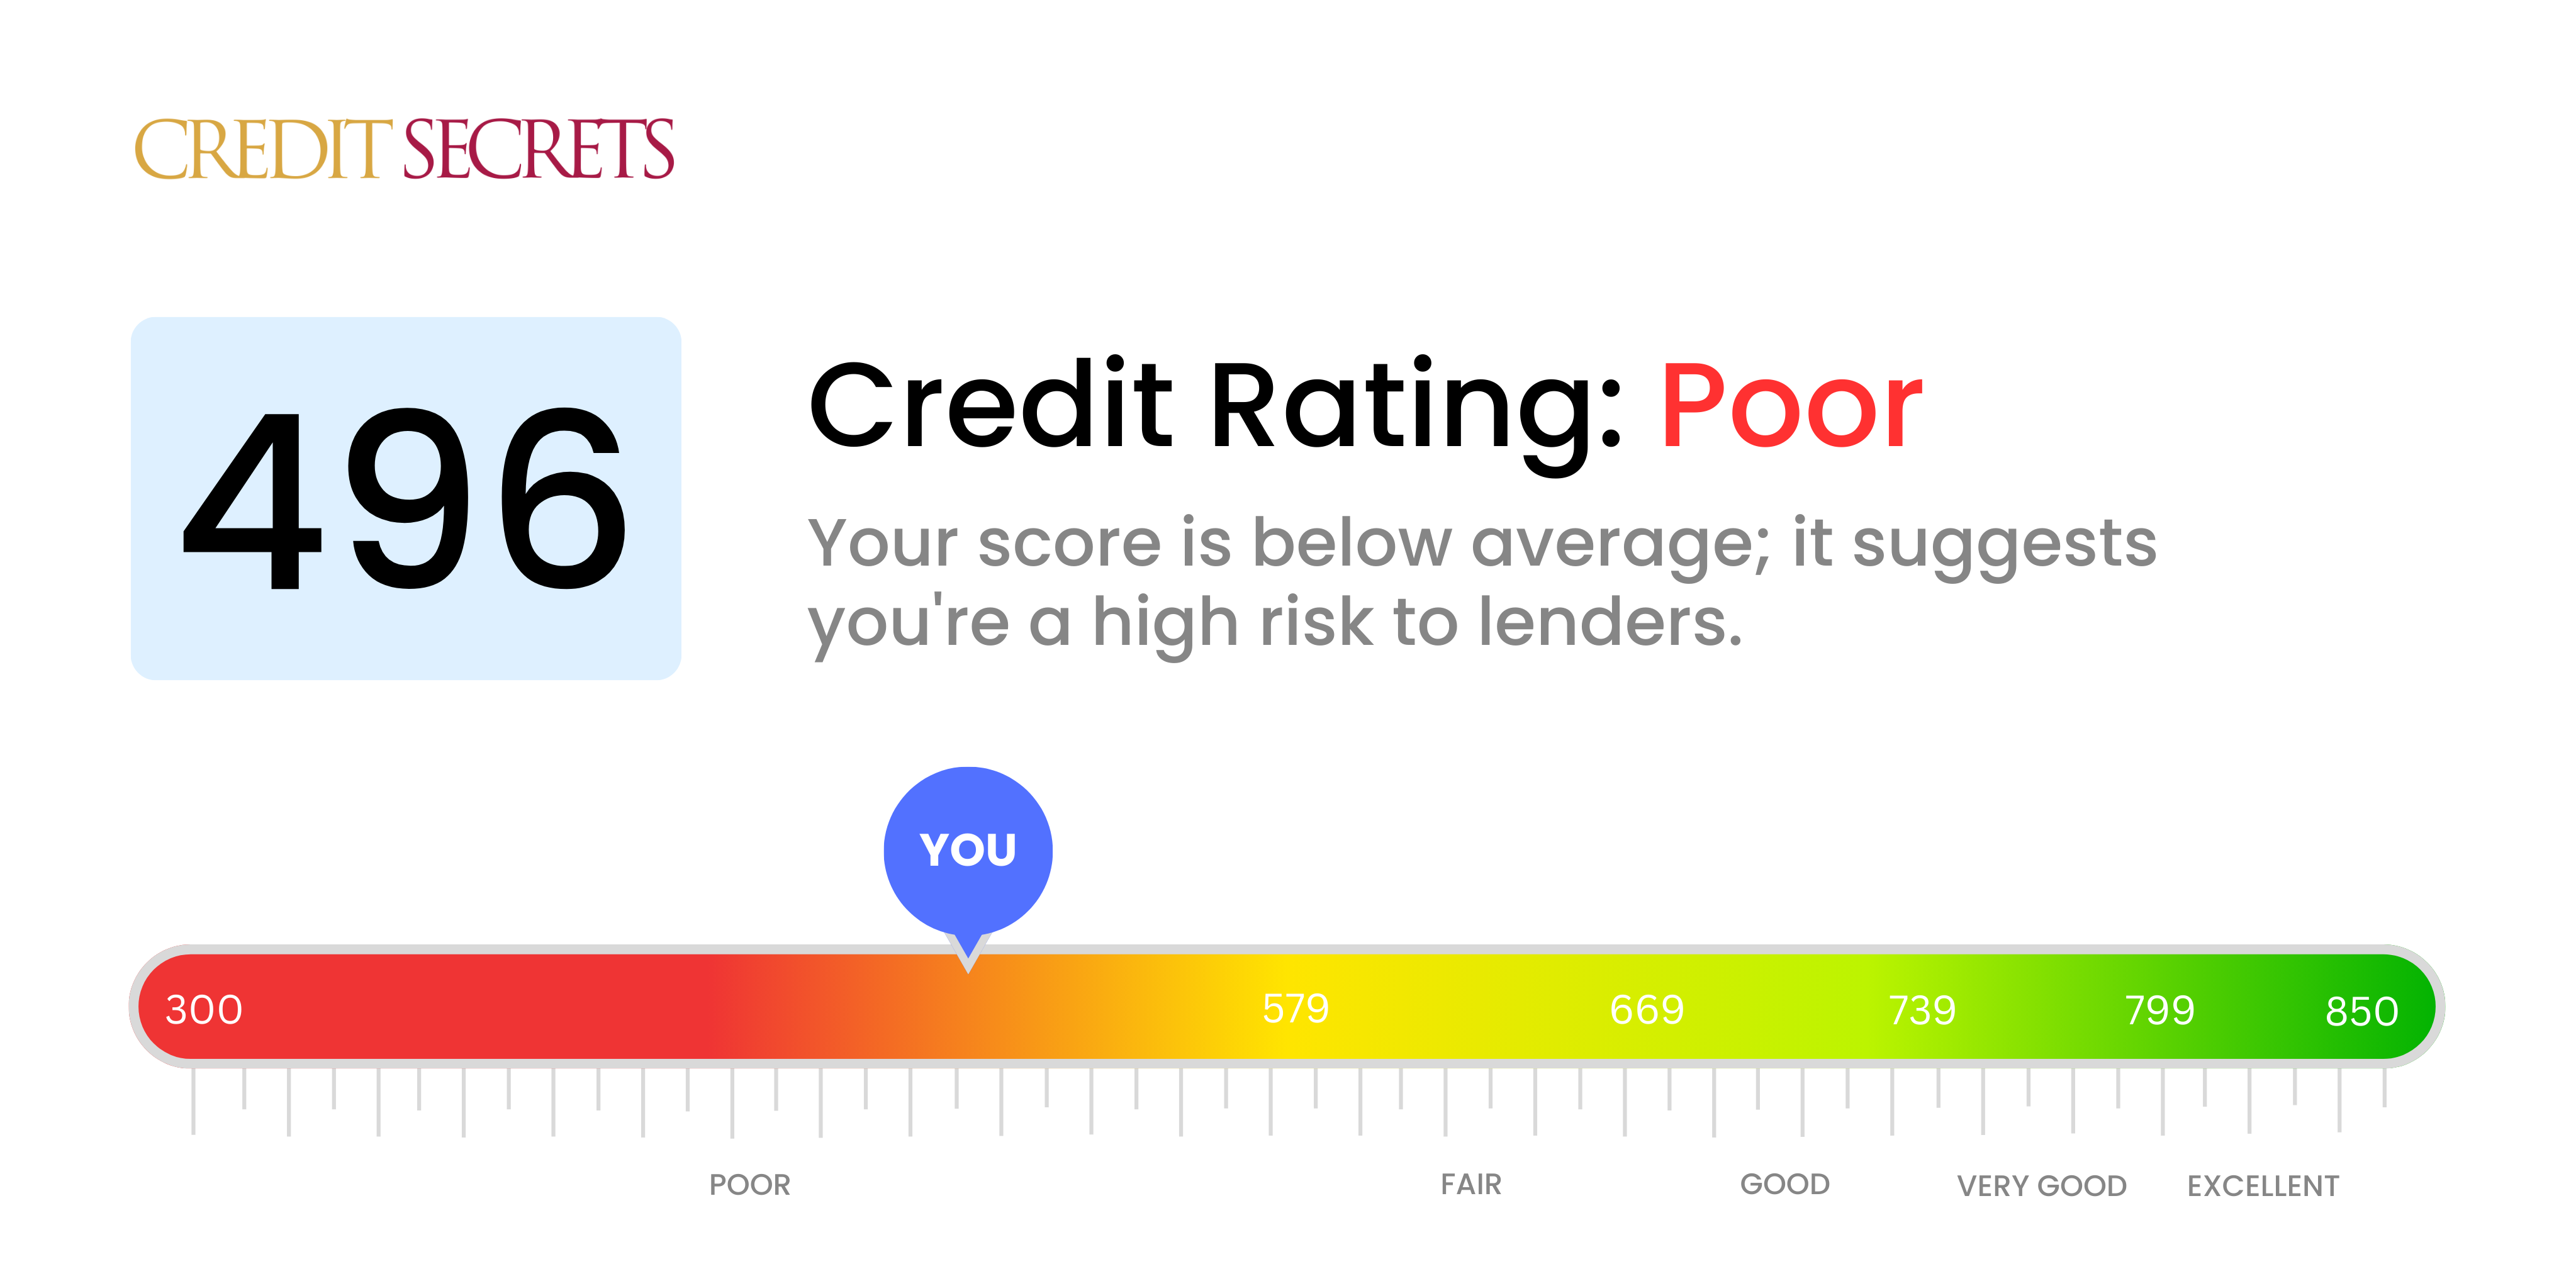 Is 496 a good credit score?